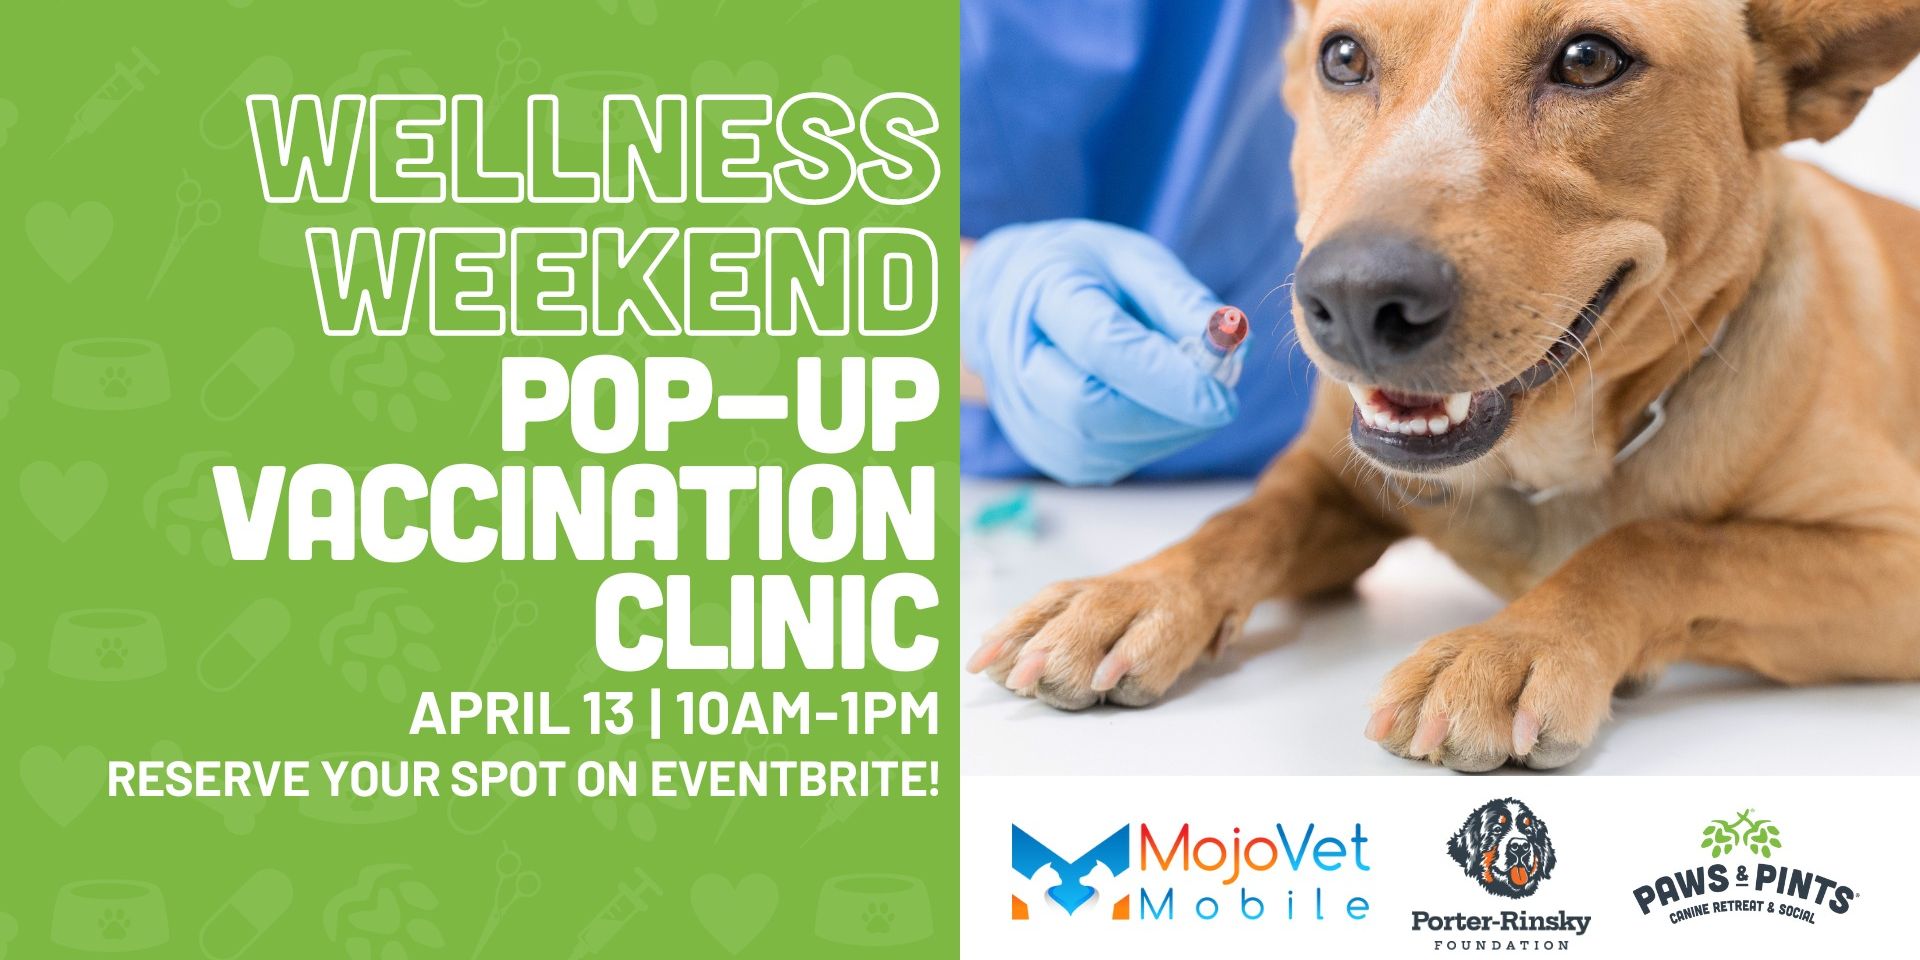 Wellness Weekend: Pop-Up Vaccination Clinic promotional image